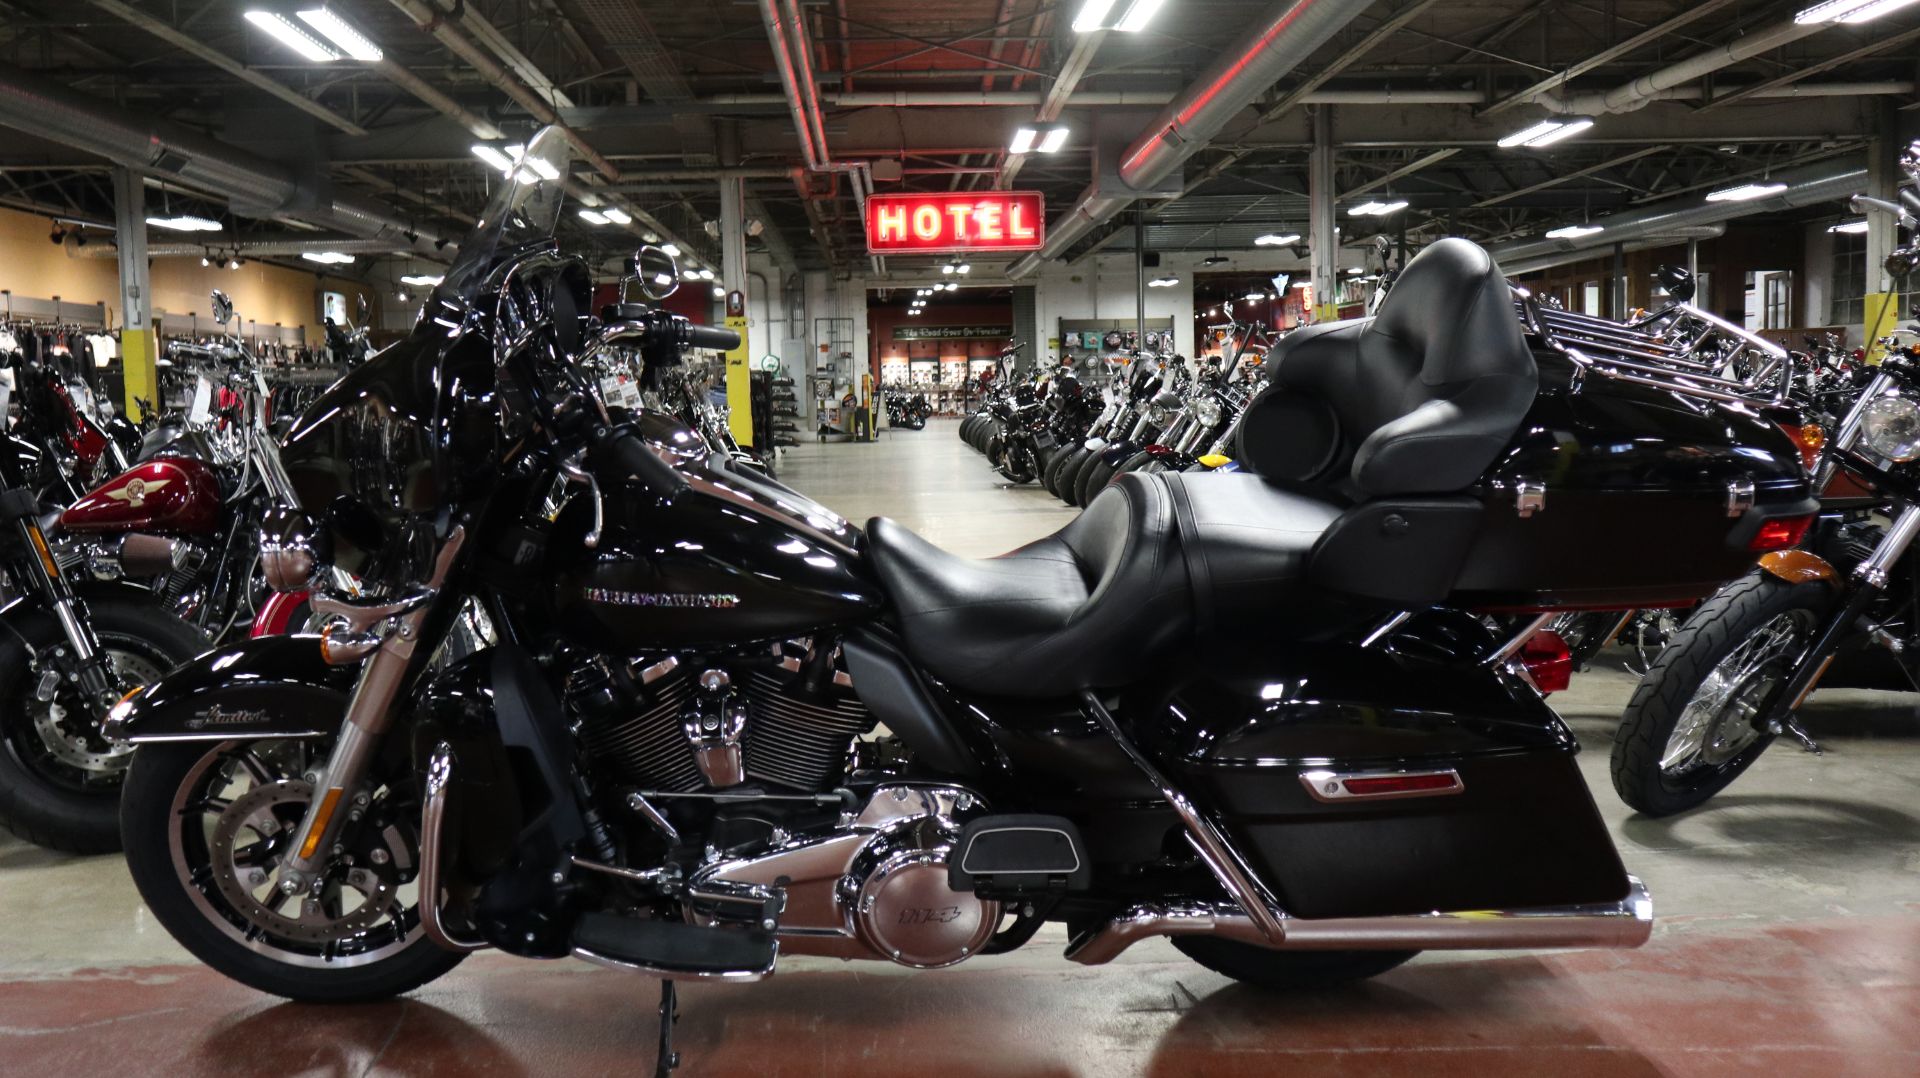 2019 Harley-Davidson Ultra Limited in New London, Connecticut - Photo 5